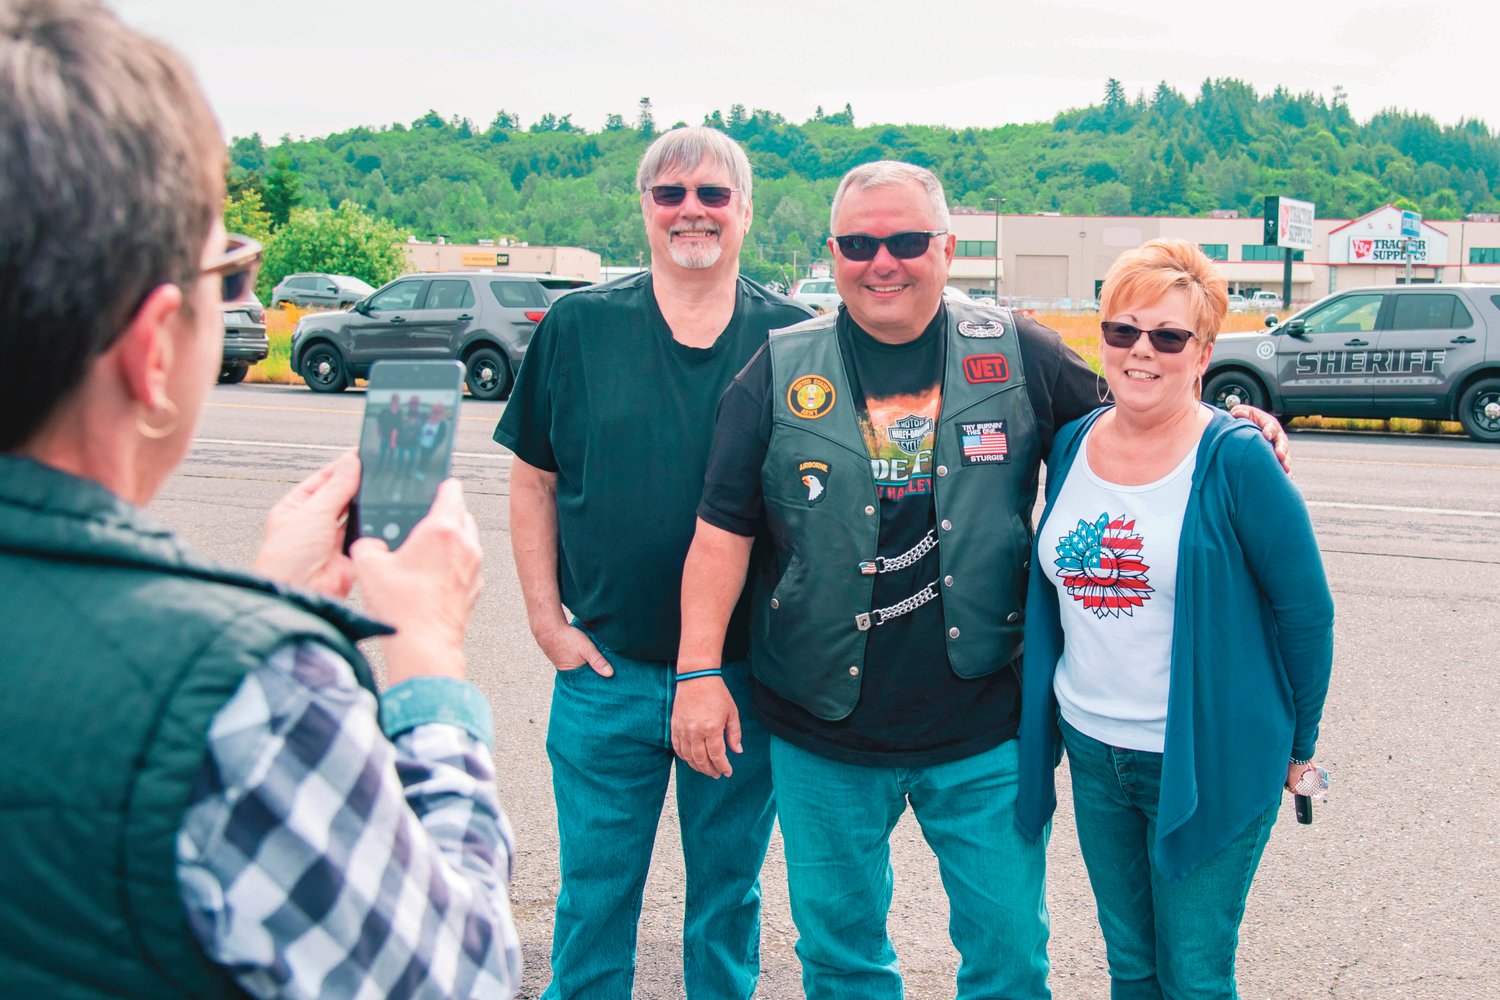 Loren Culp, who is part of the motorcycle procession during the Beyond the Call of Duty Ride to Remember 2020 memorial ride, poses for photos at the Chehalis Washington State Patrol office on Sunday.